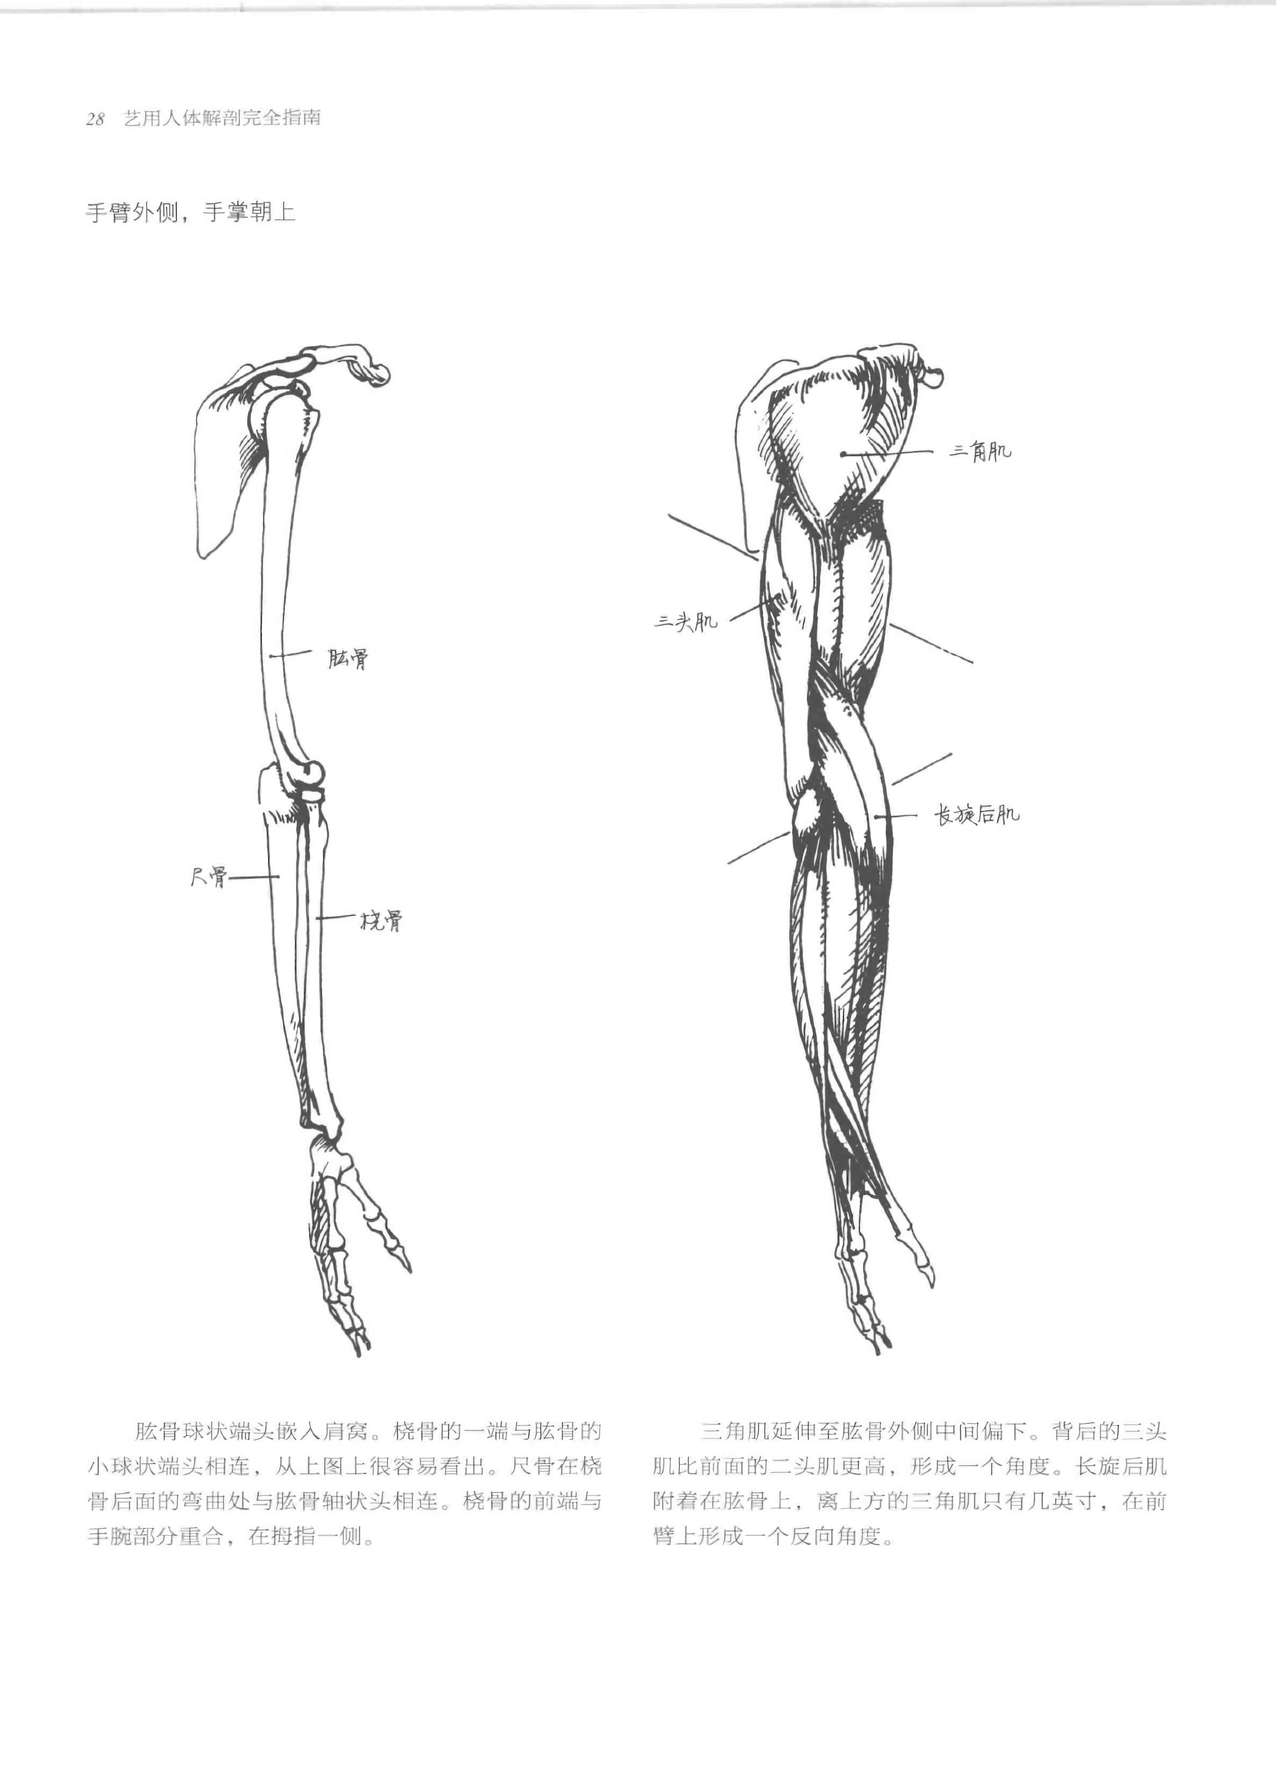 Anatomy-A Complete Guide for Artists - Joseph Sheppard [Chinese] 28